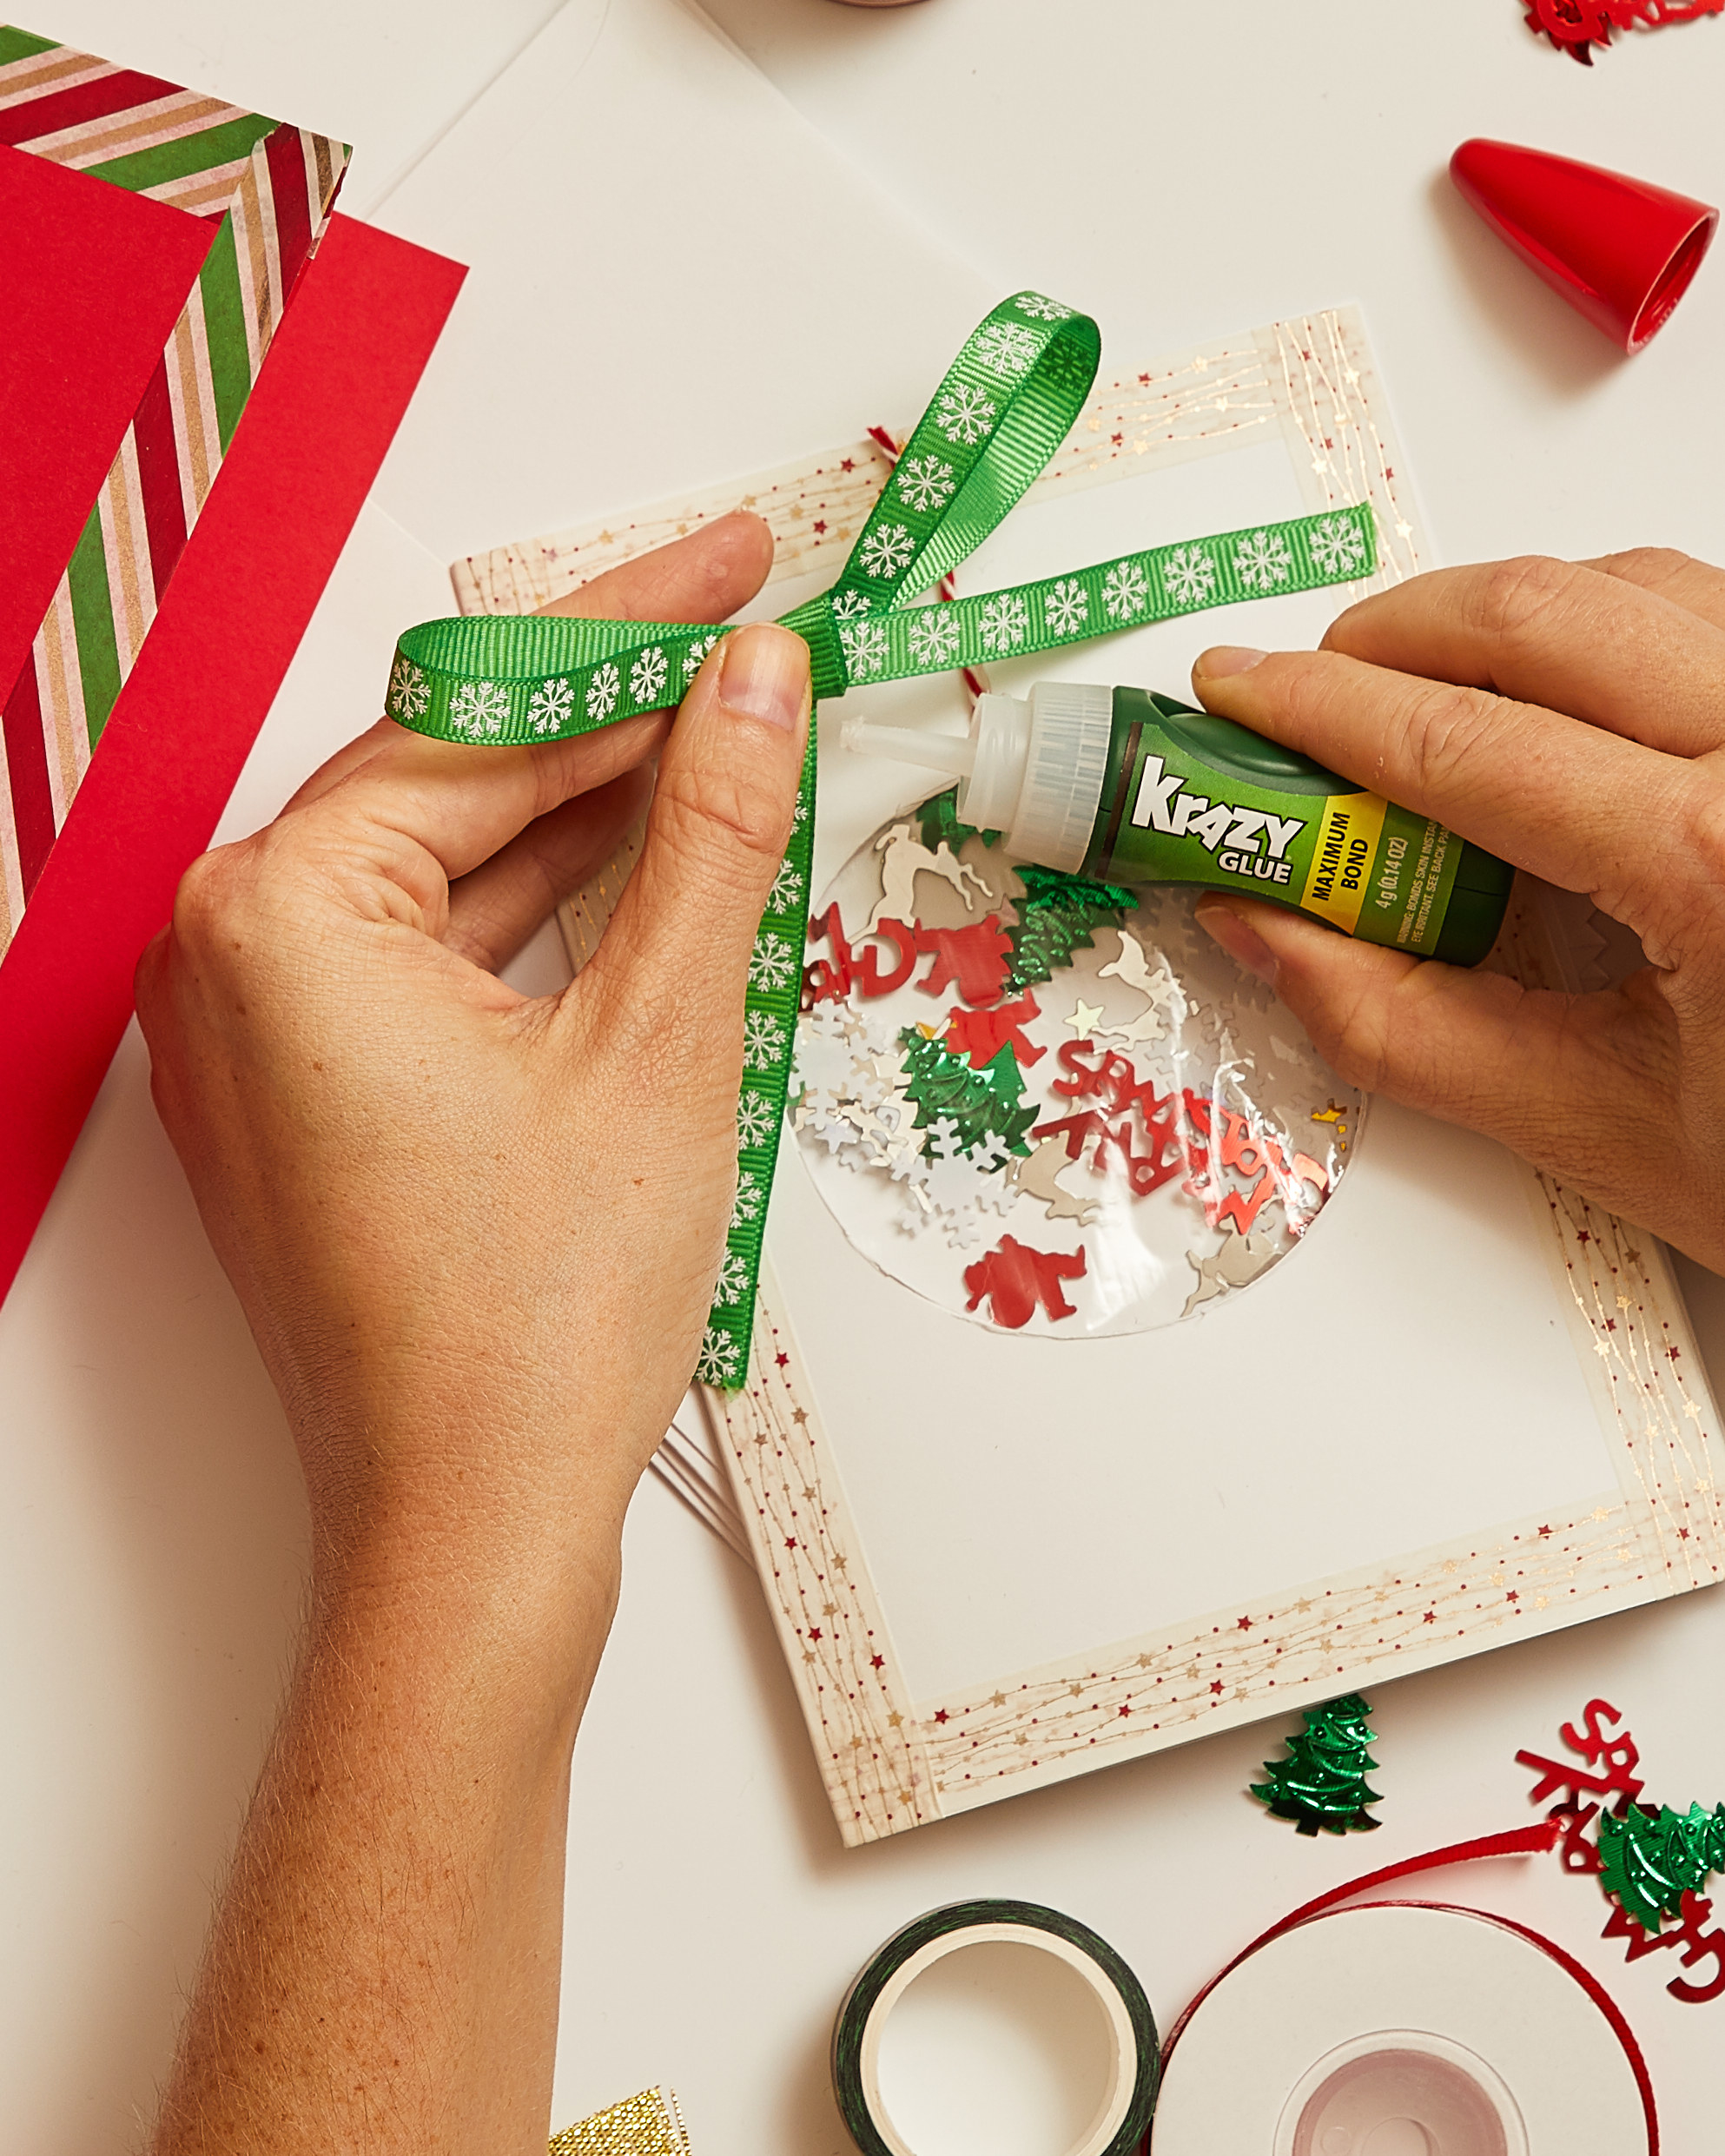 Person gluing a bow to the top of the card over the ornament.